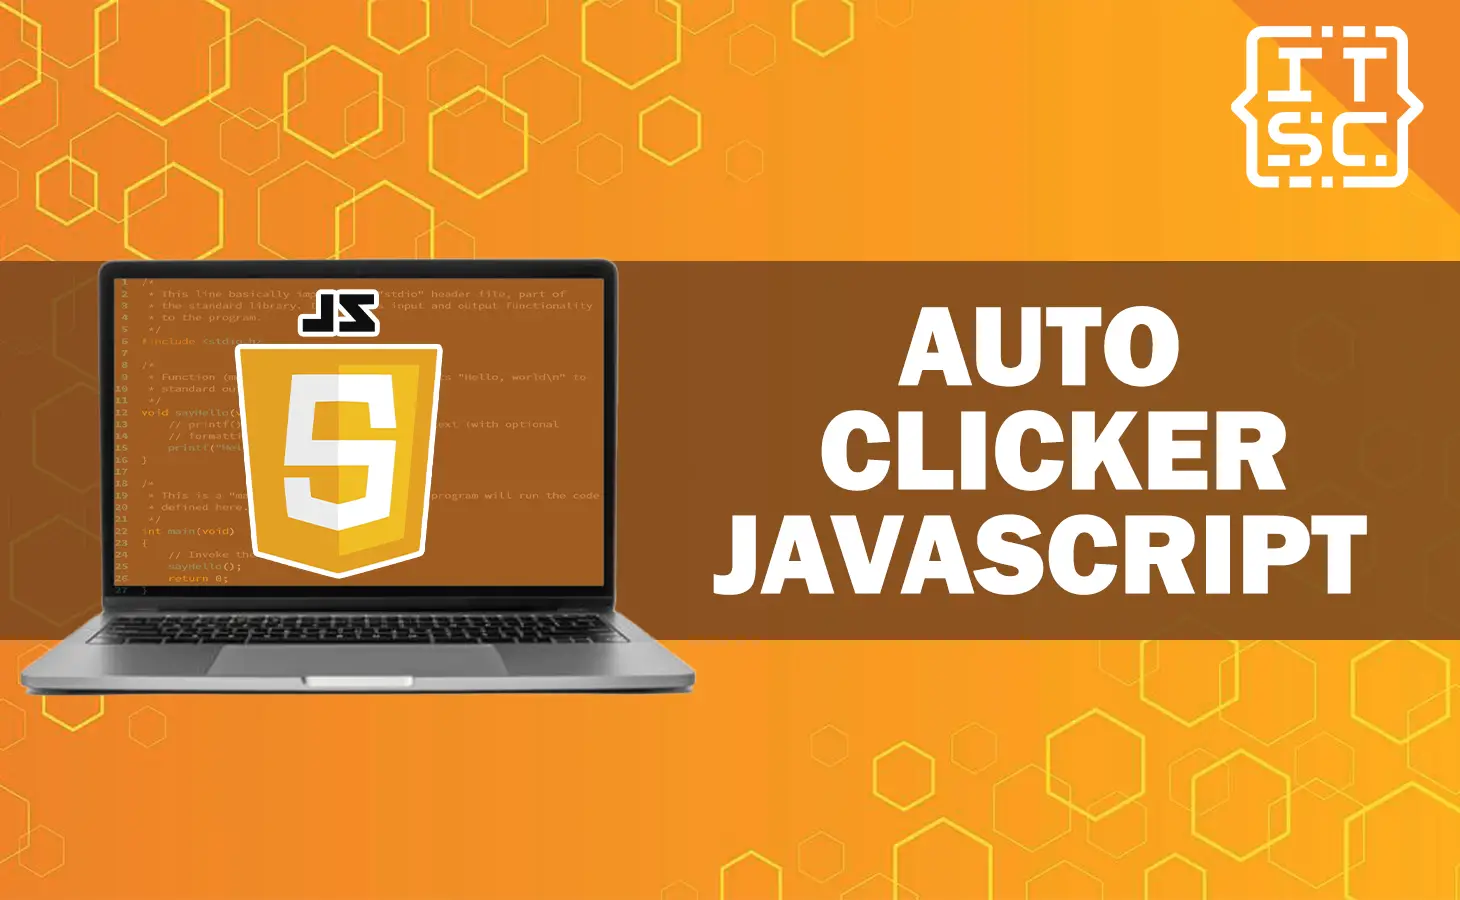 How to make an auto clicker in JavaScript?